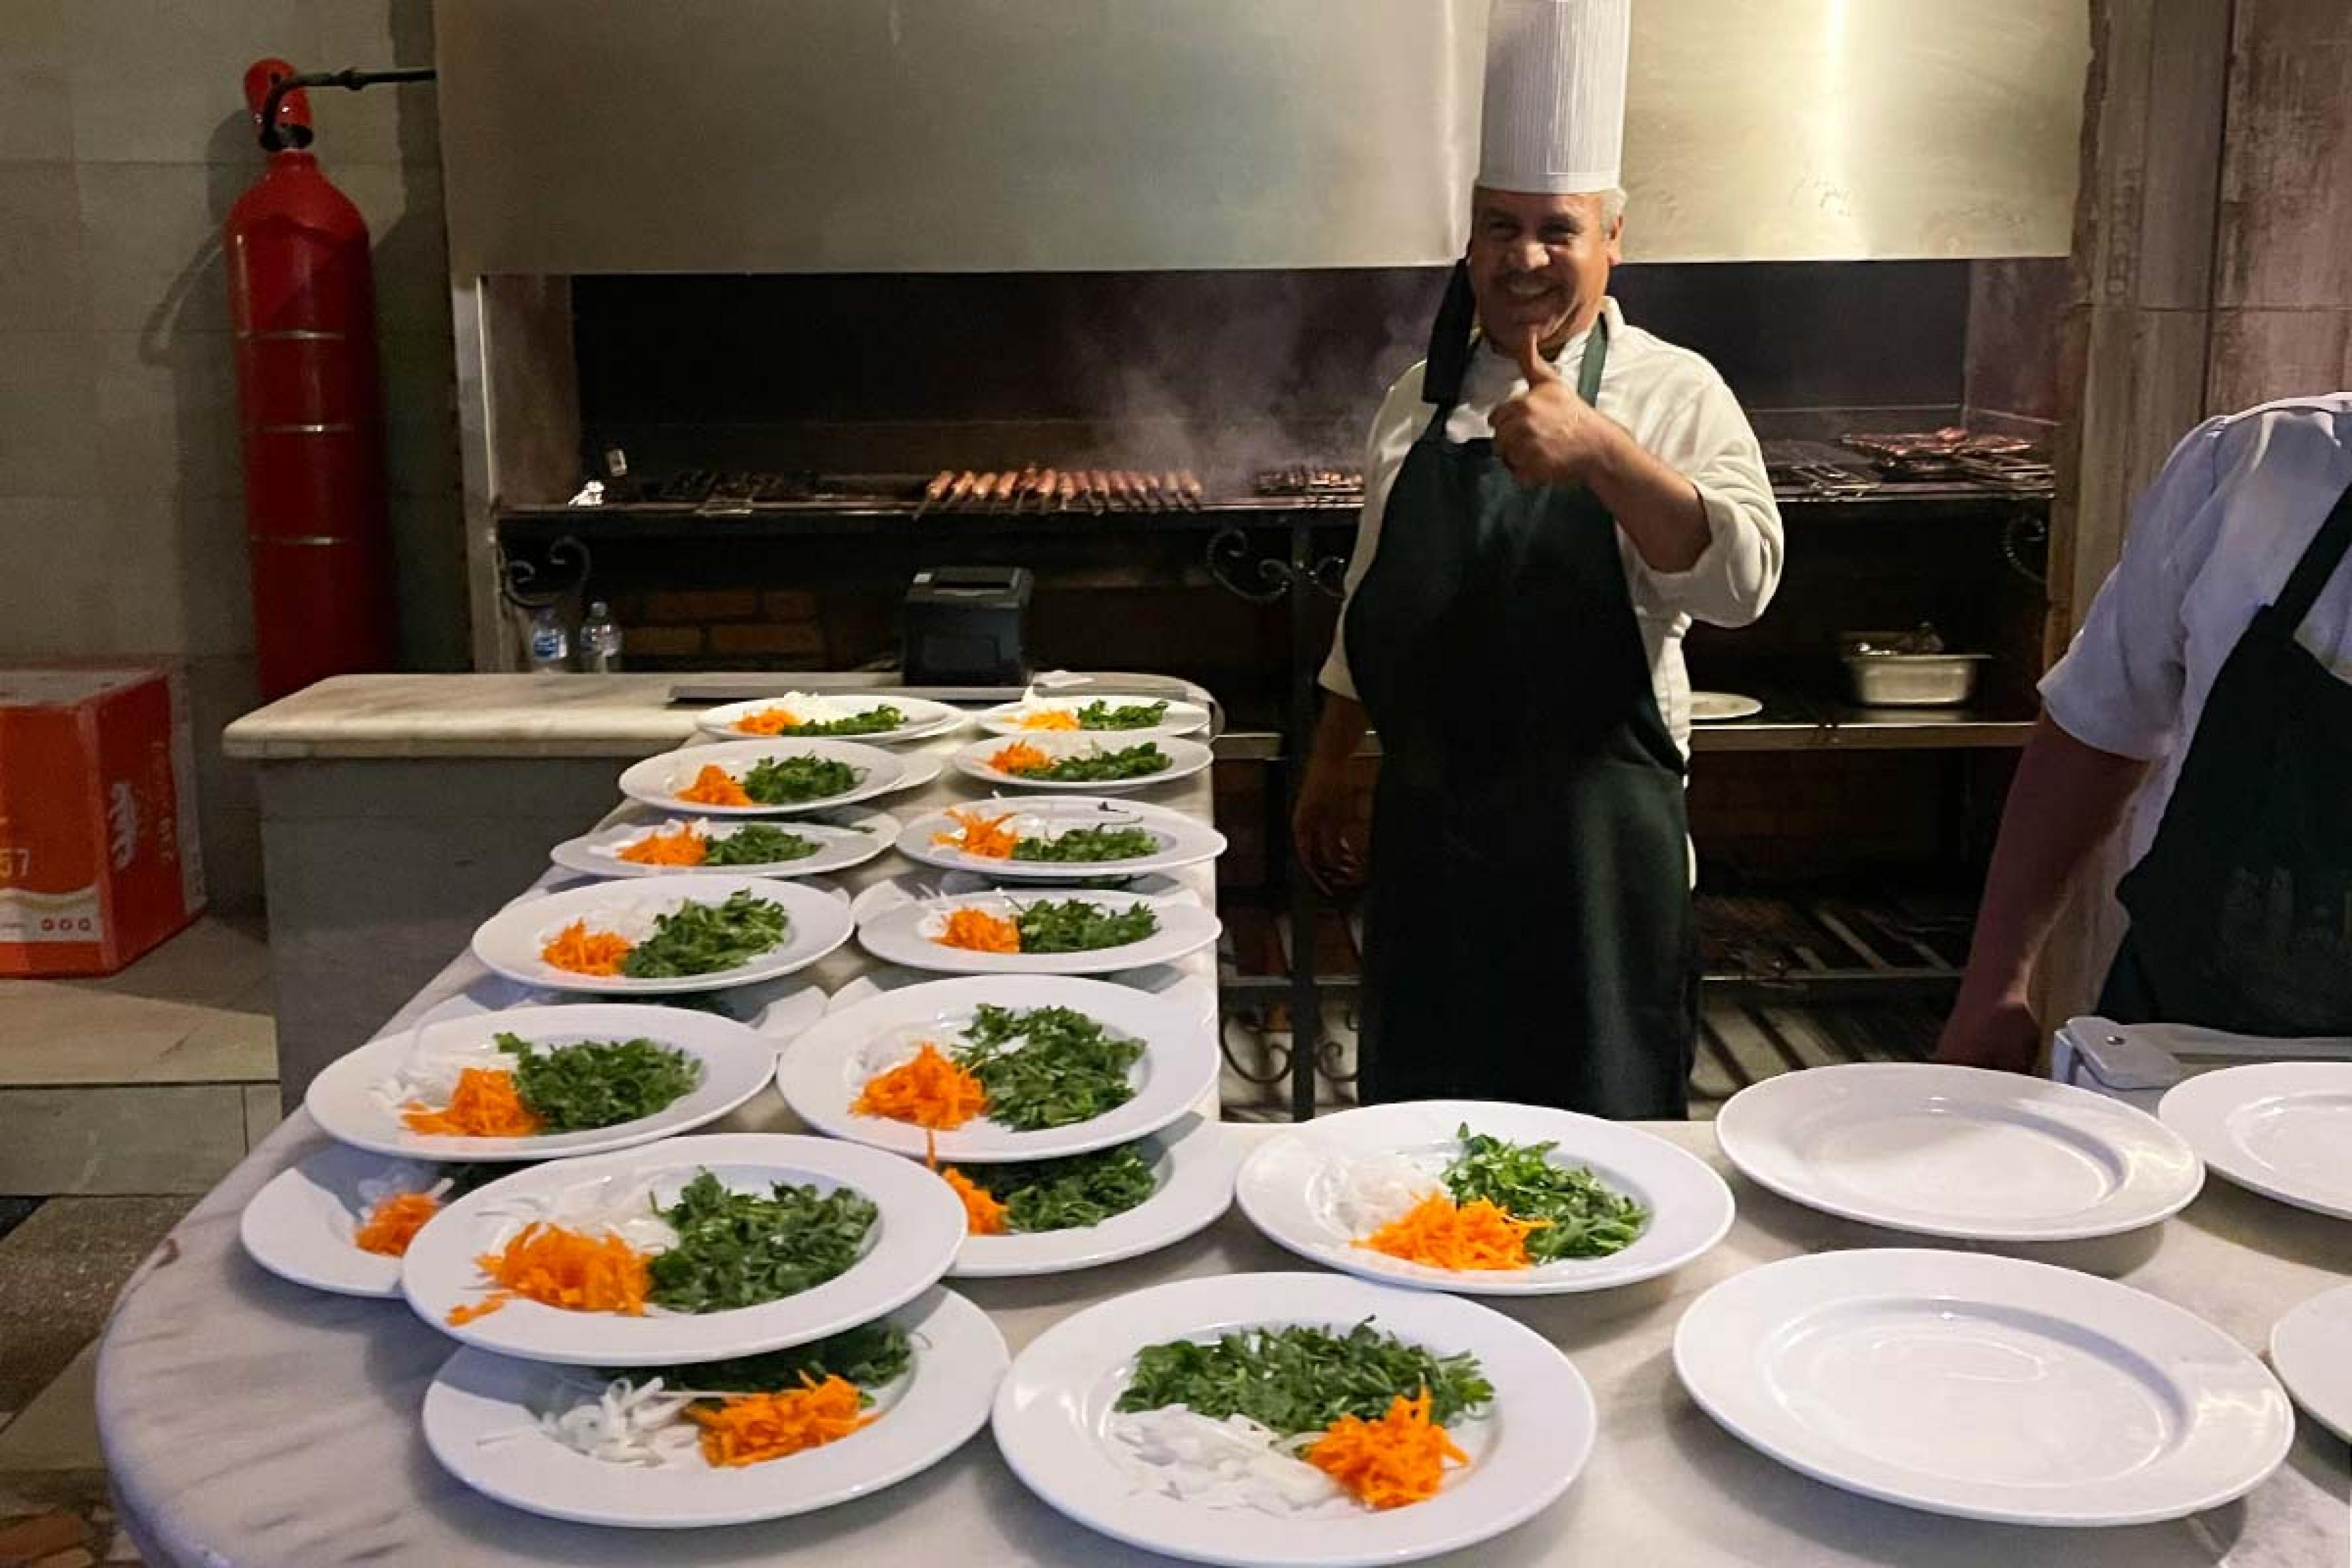 counter with plates of vegetables and a smiling chef